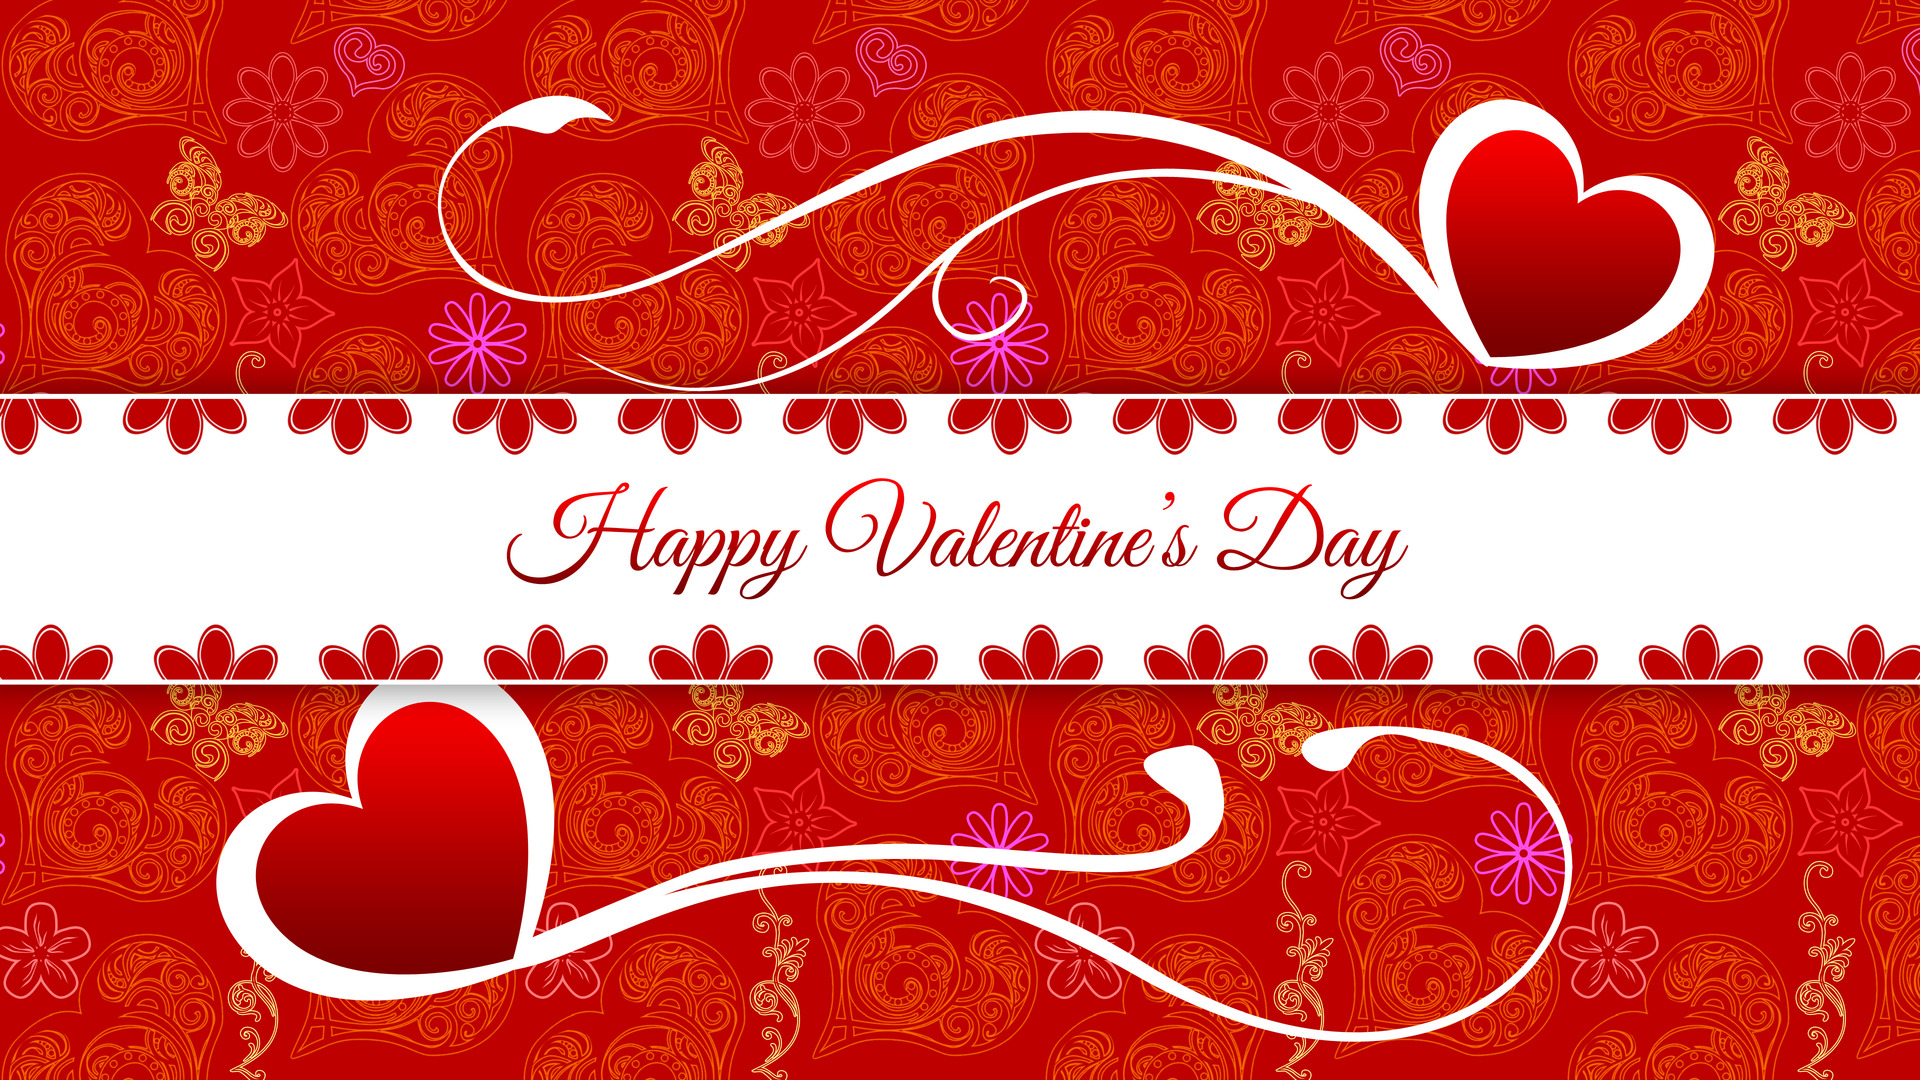 free-download-happy-valentines-day-card-hd-wallpaper-background-image